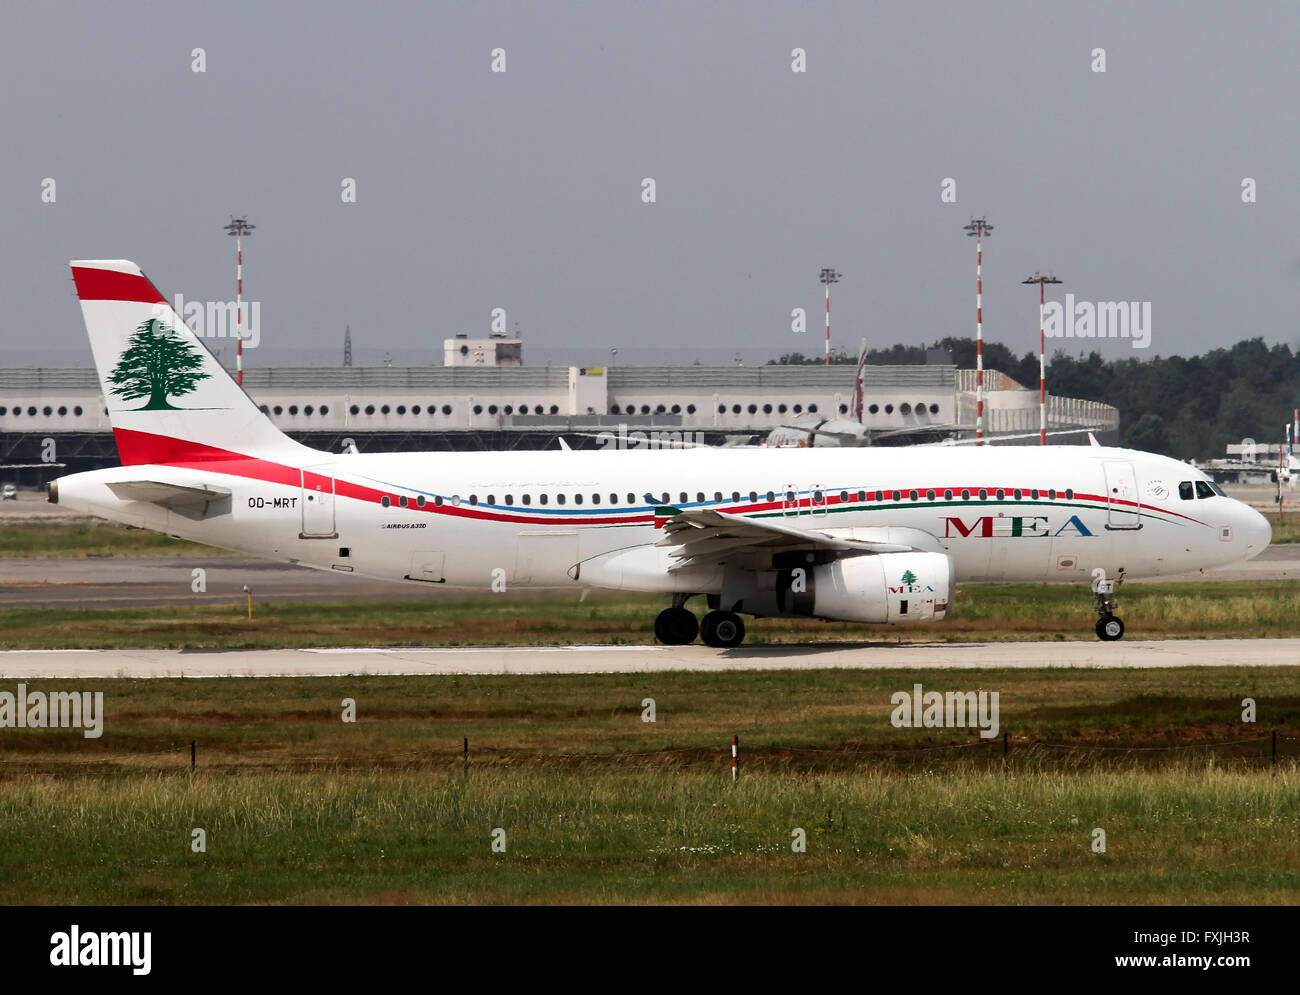 OD-MRO MEA - Middle East Airlines Airbus A320-232 am Flughafen Mailand Stockfoto